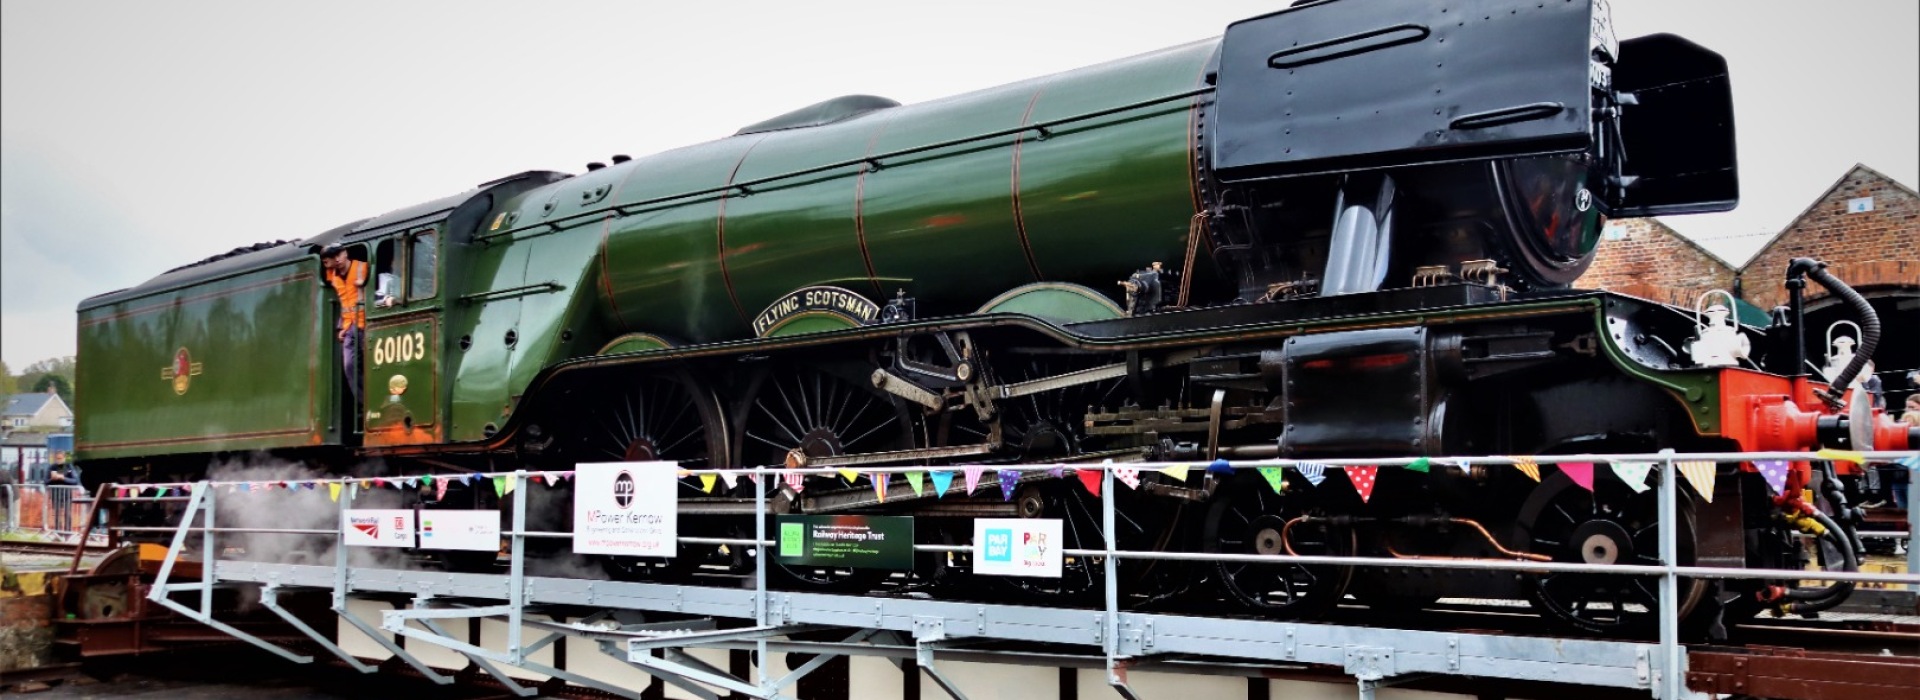 Taziker Assist the Restoration of St Blazey Turntable Ready for a Visit from the Flying Scotsman